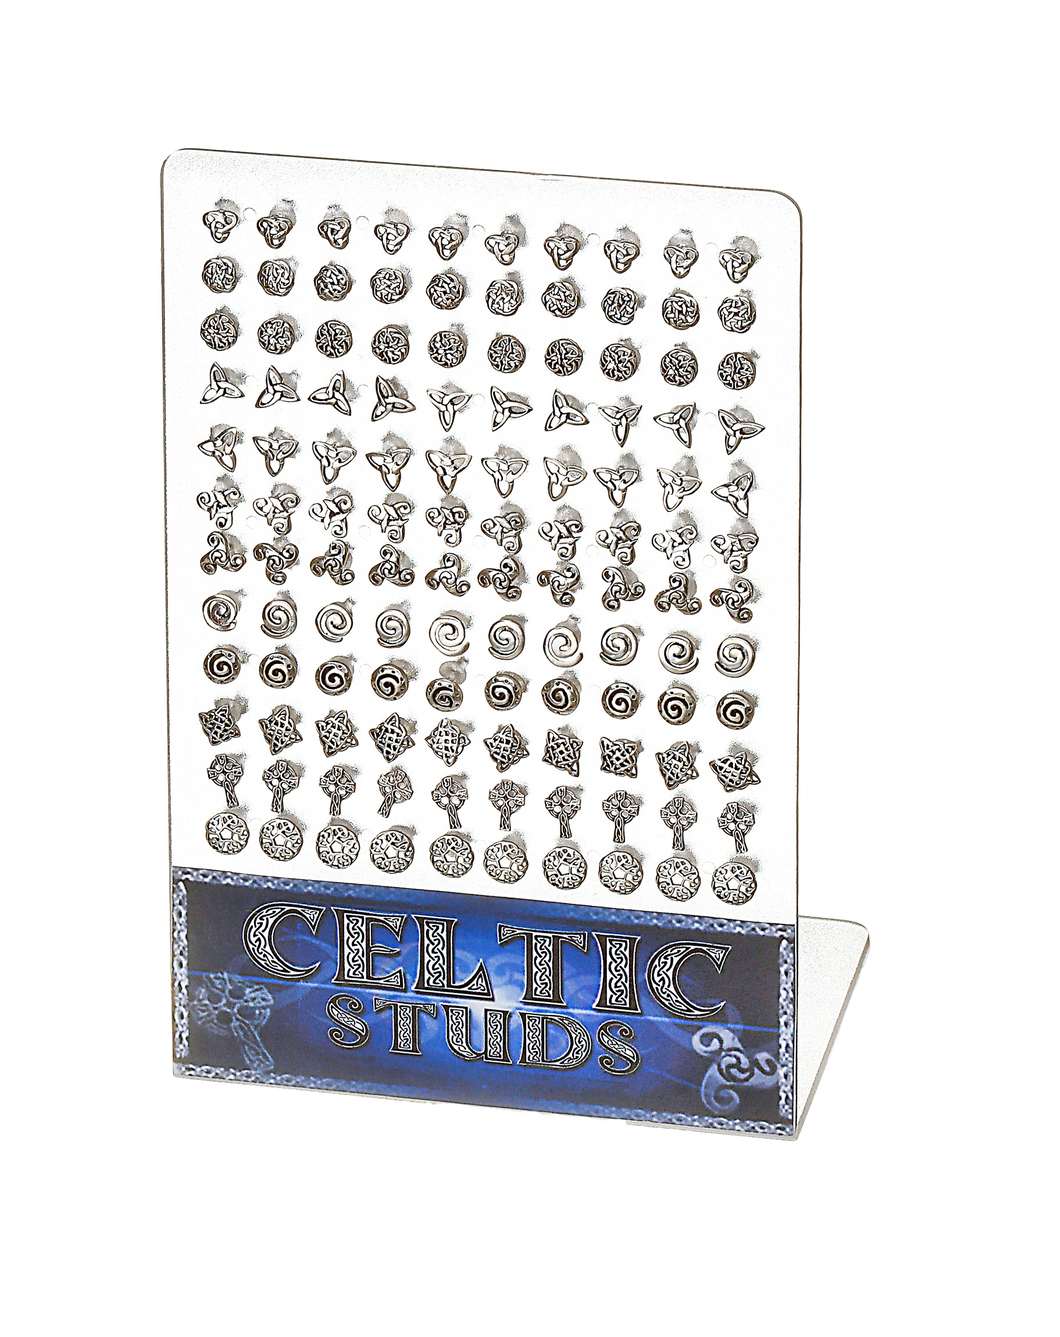 CELTIC TRAY OF STUDS black tray only available